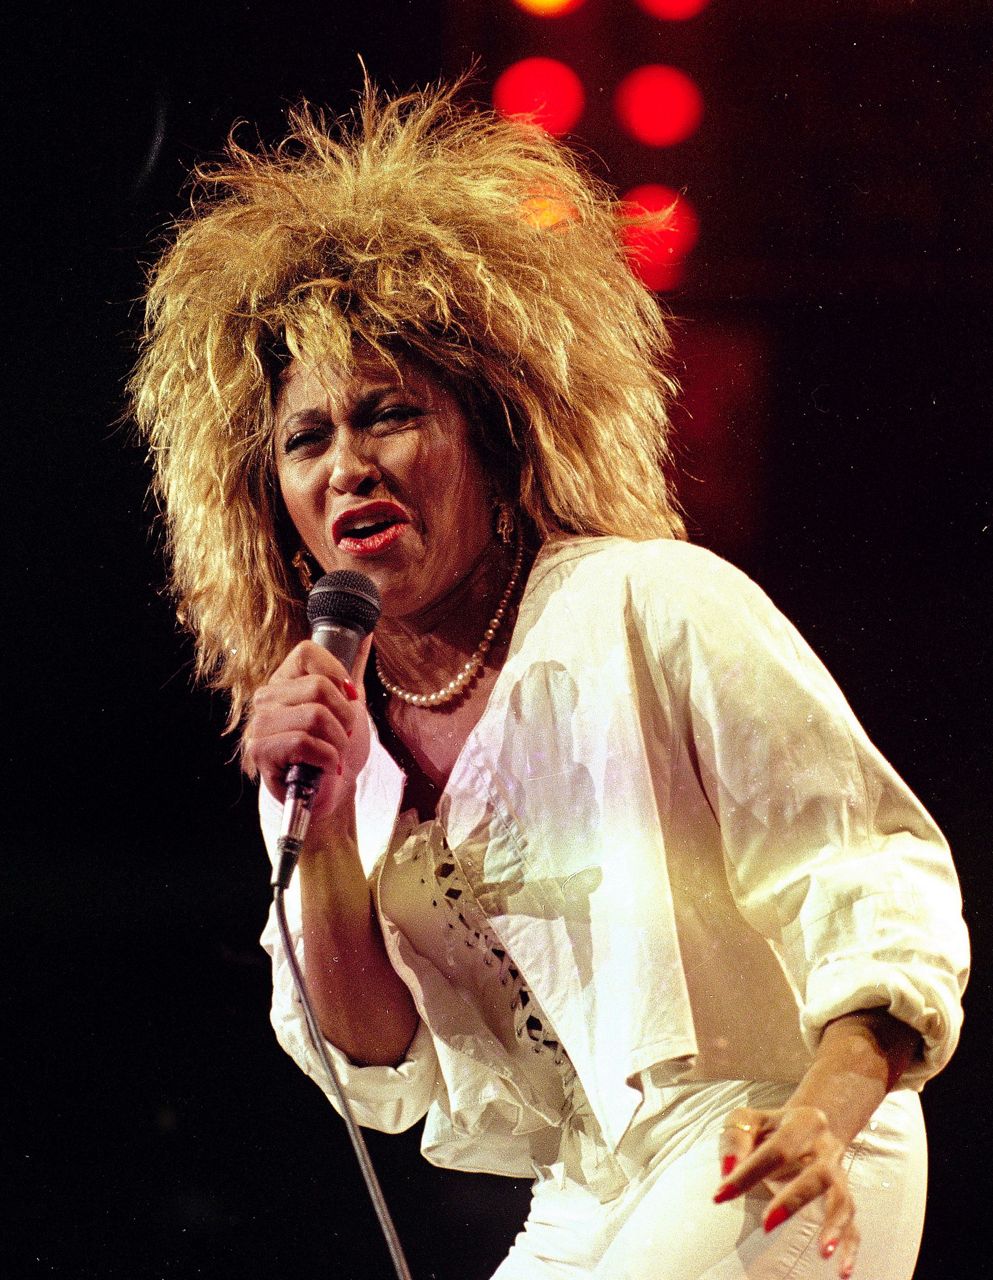 Tina Turner Queen Of Rock N Roll Whose Triumphant Career Made Her World Famous Dies At 83 1704